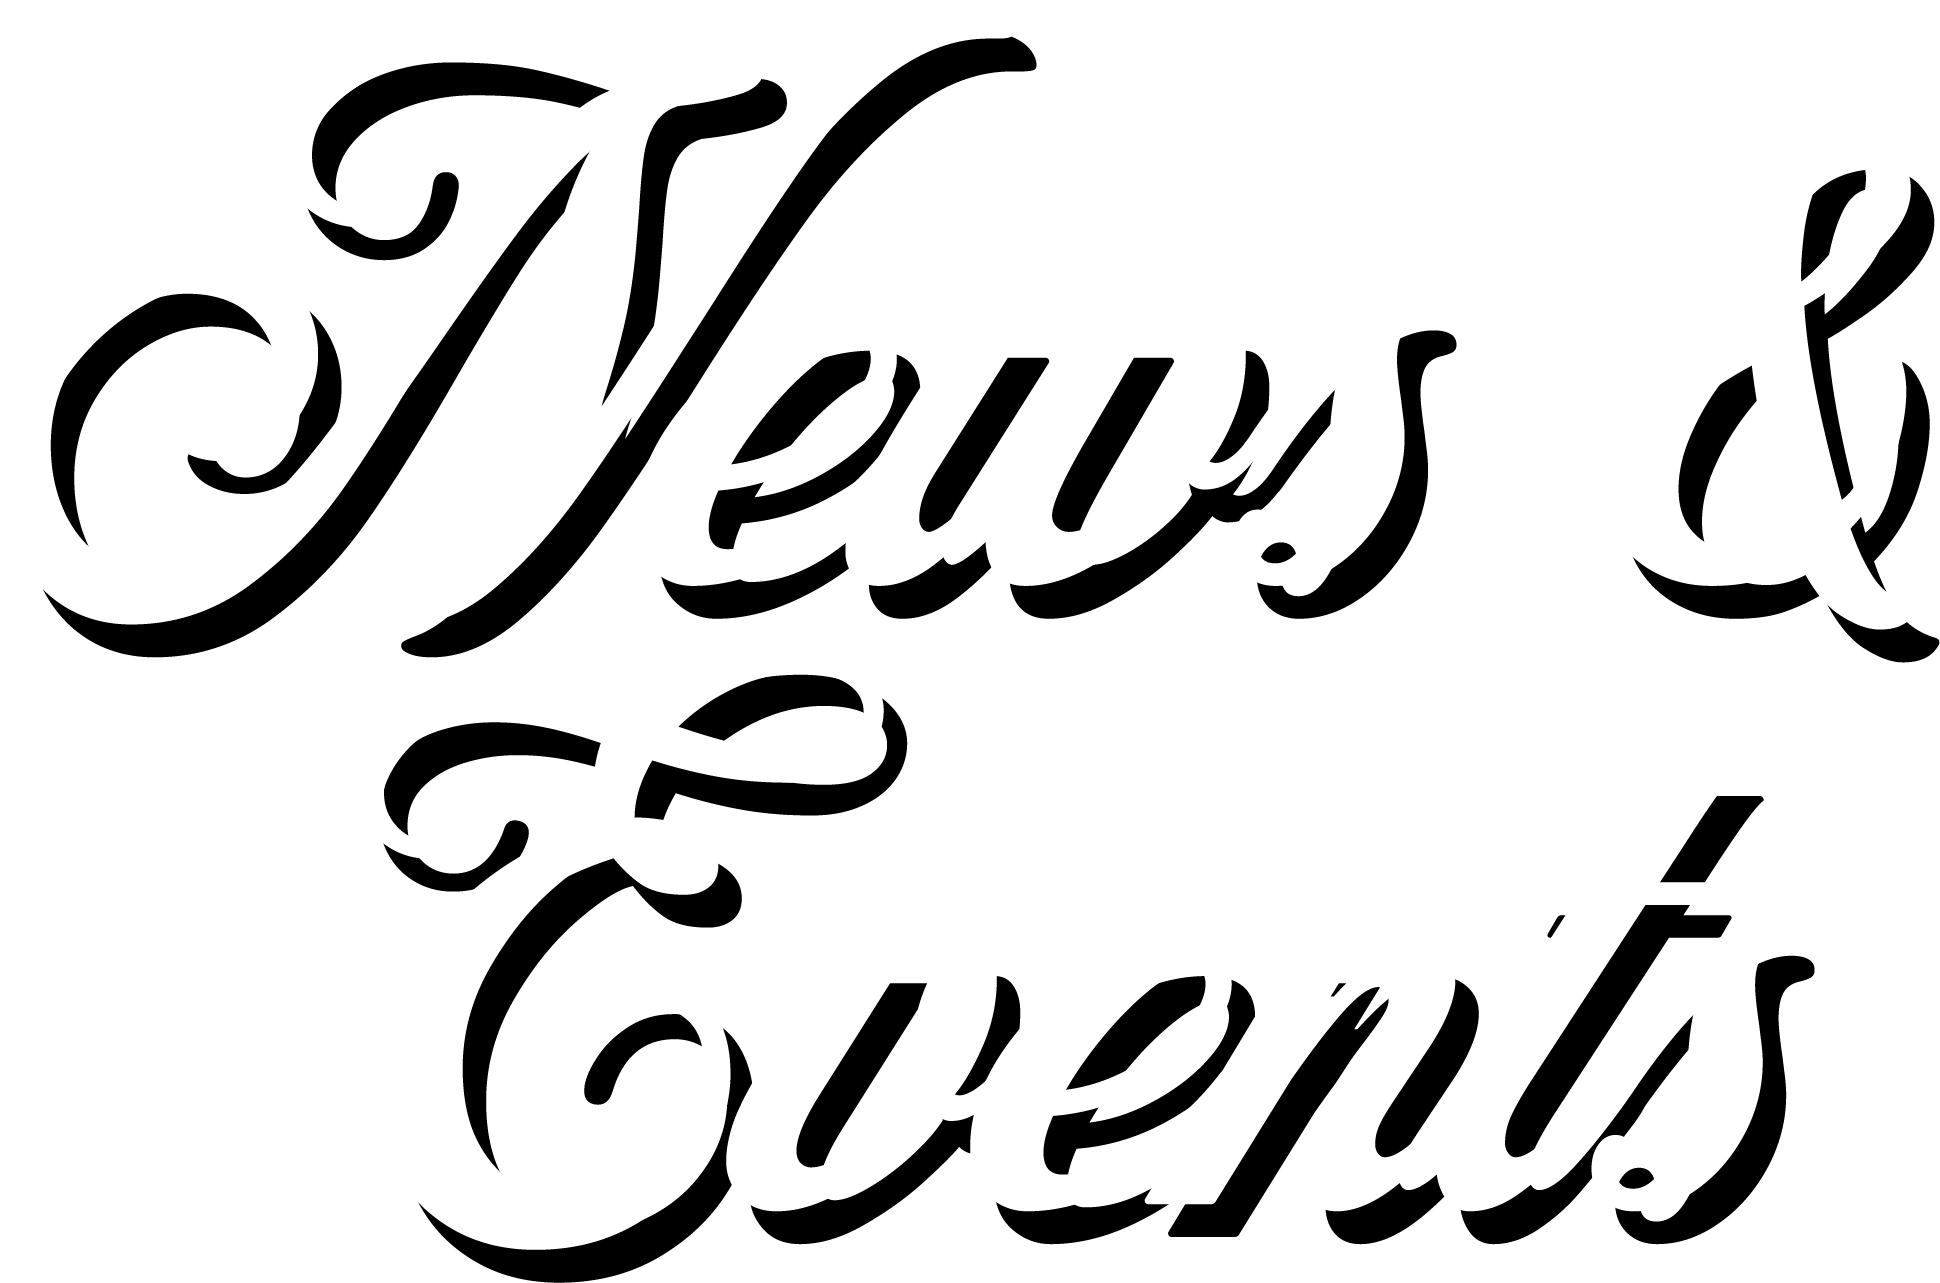 News and events